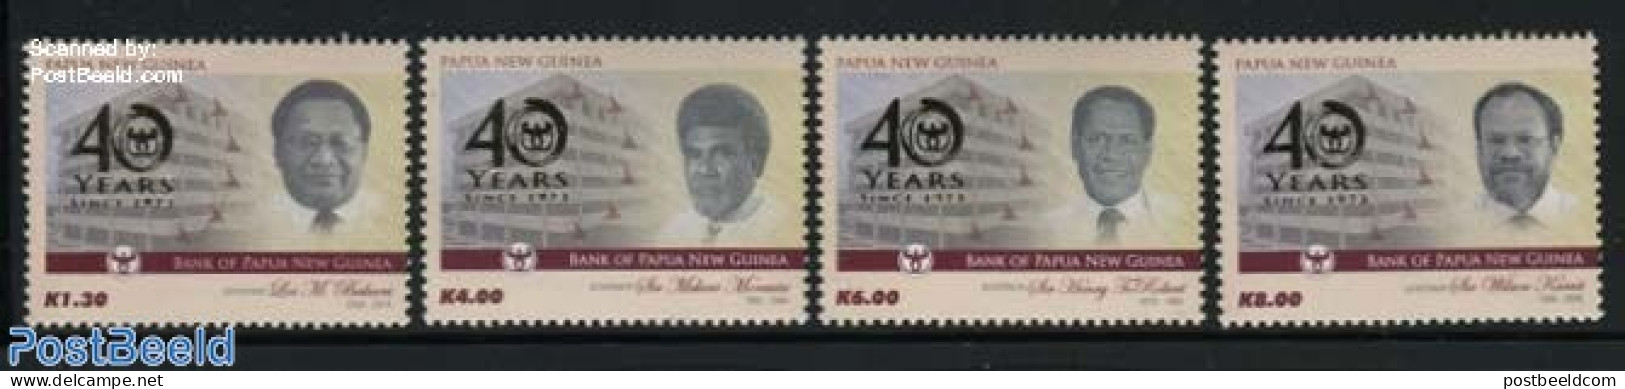 Papua New Guinea 2014 40 Years Bank Of Papua New Guinea 4v, Mint NH, Various - Banking And Insurance - Papua New Guinea